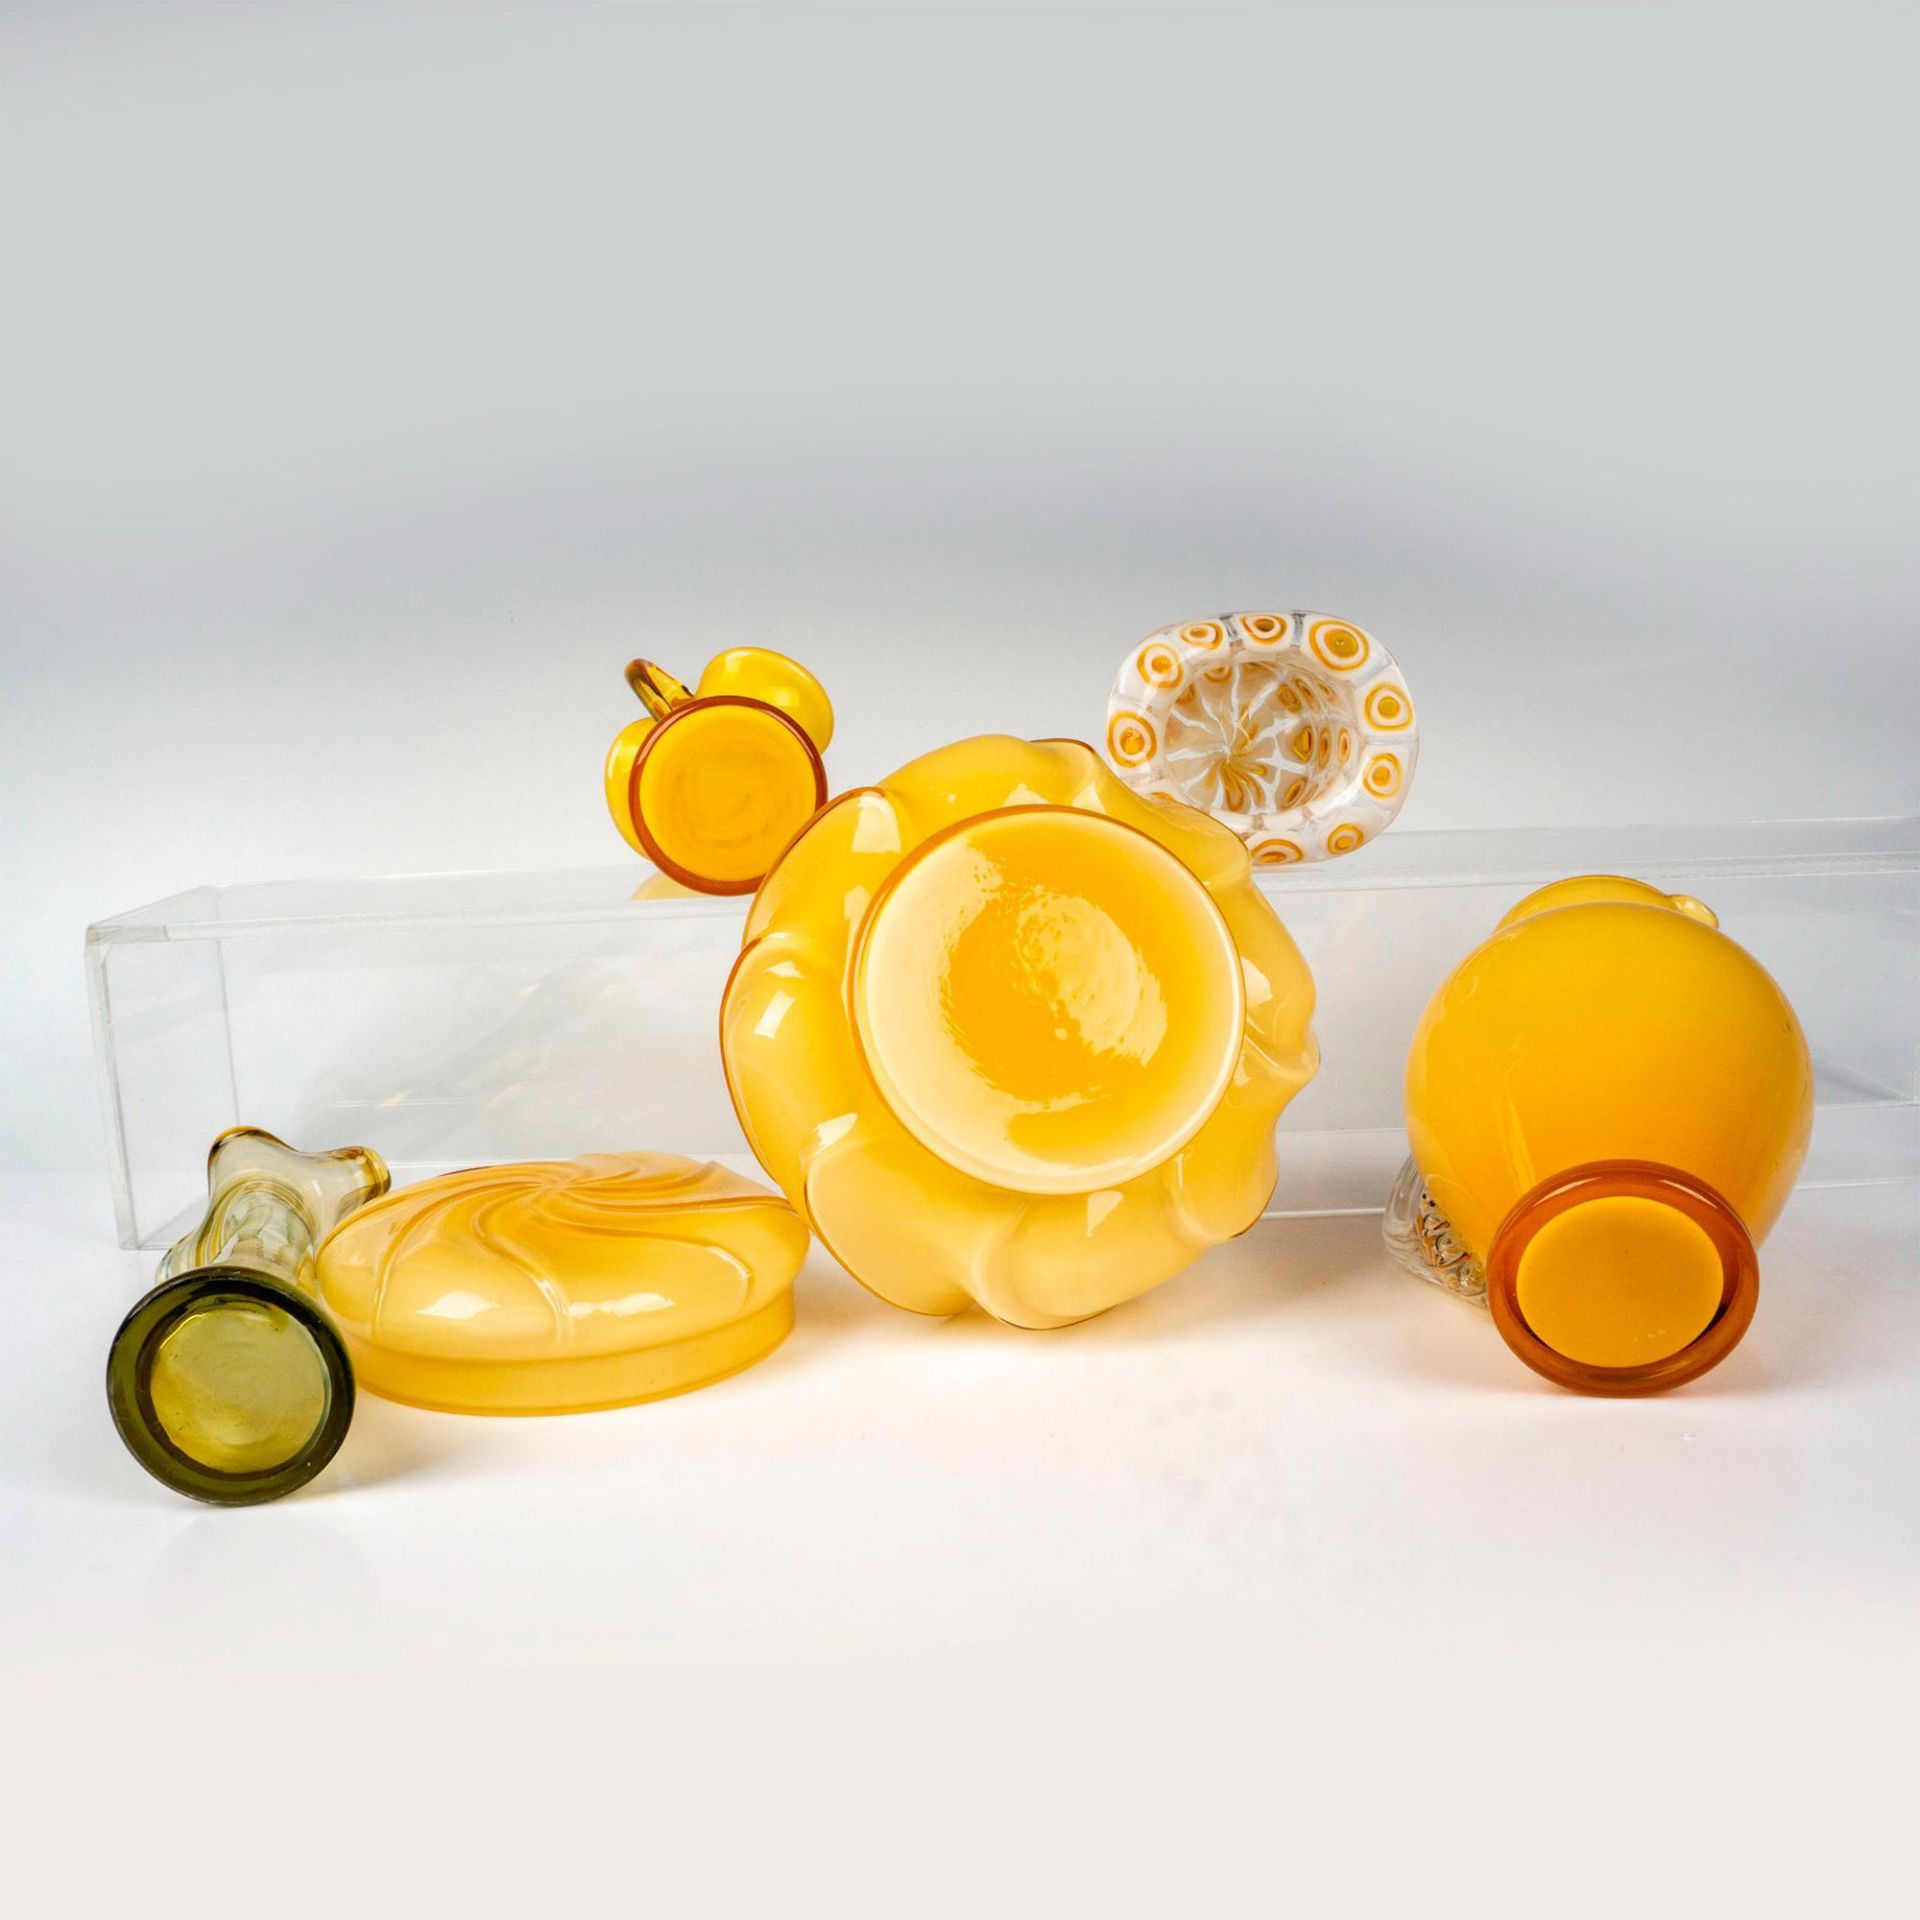 5pc Amber Colored Glass Grouping - Image 3 of 3